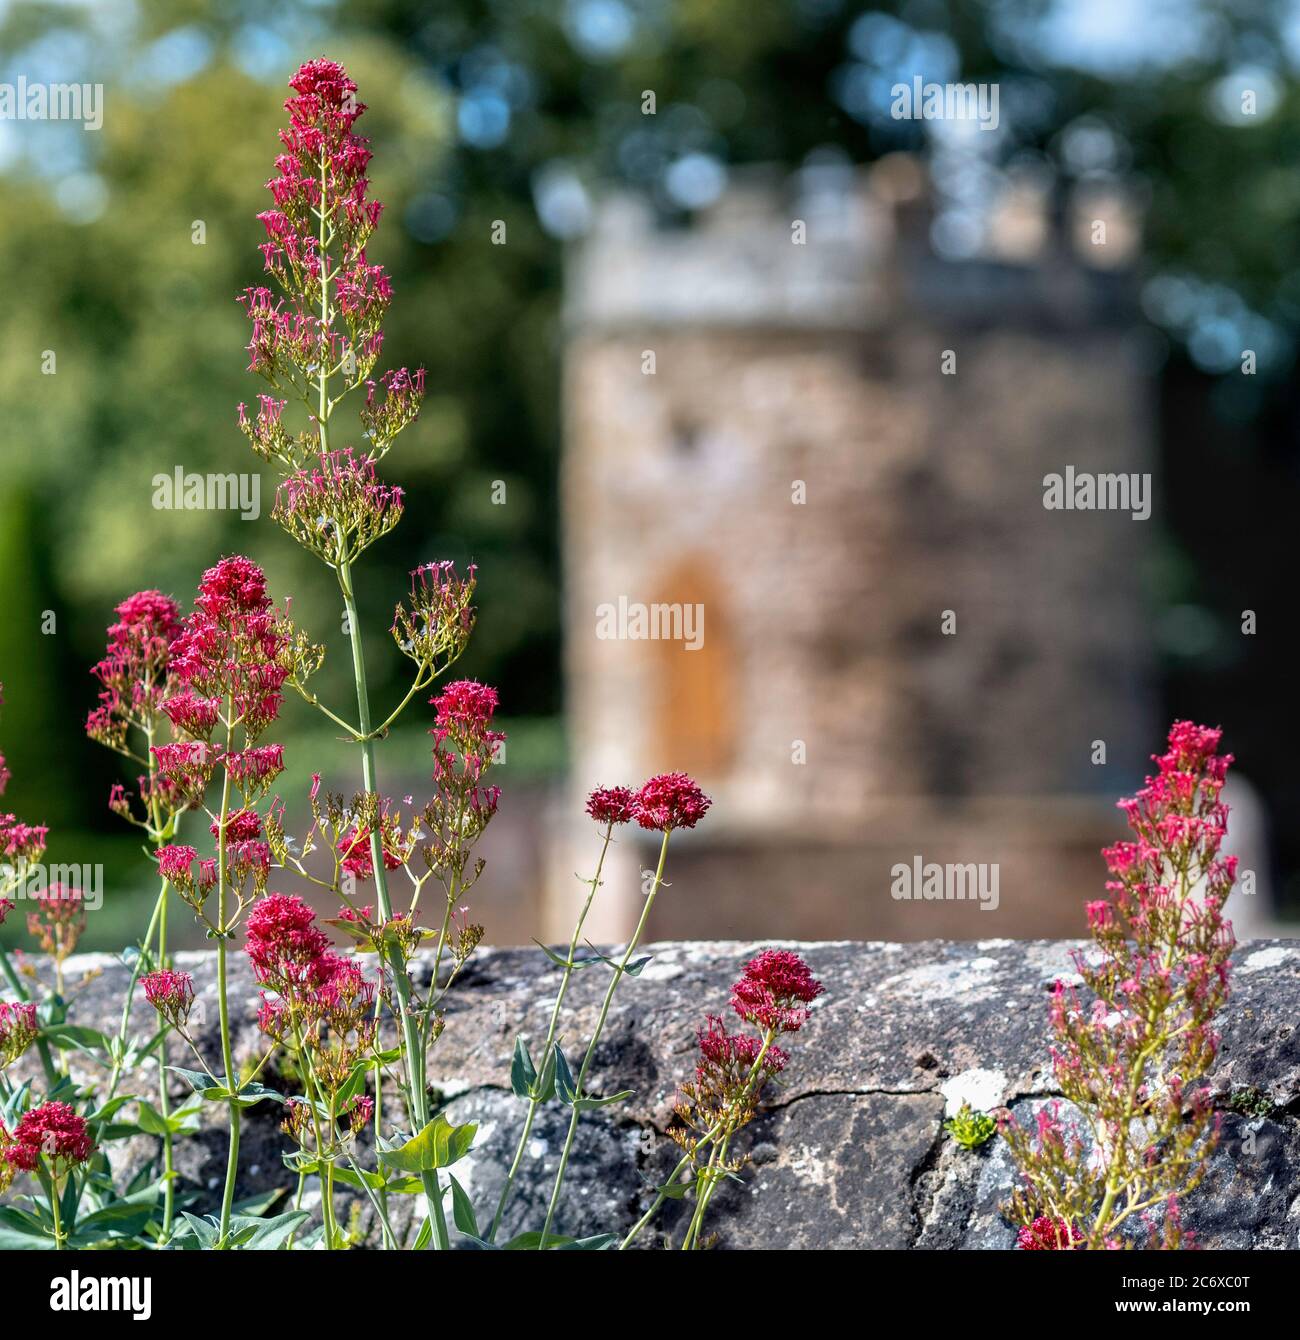 Tall Red Flower growing in the graveyard at Church of St Mary the Virgin, a Church of Scotland parish church in Haddington, East Lothian, Scotland,. Stock Photo